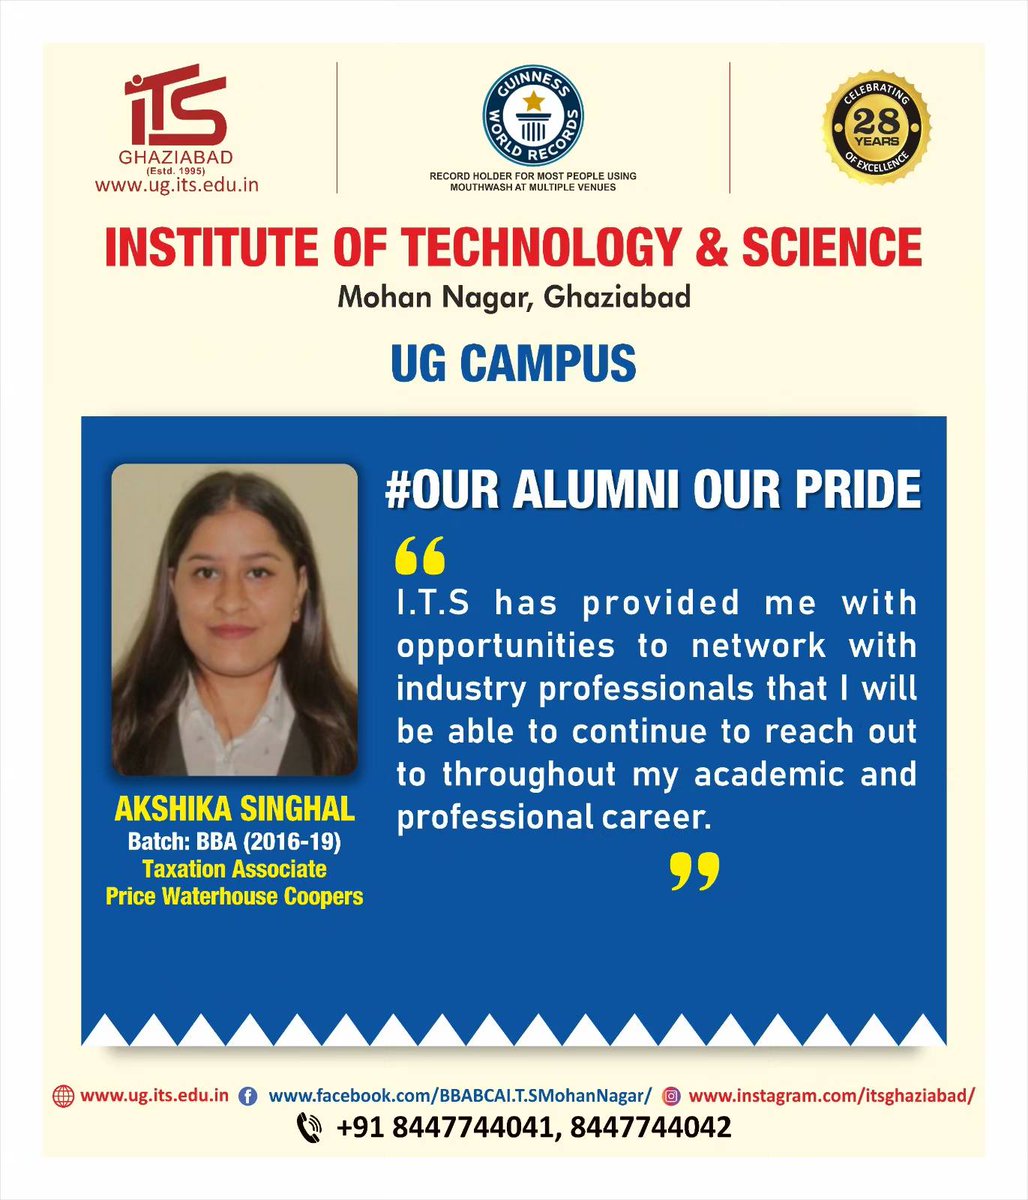 #ouralumniourpride Akshika Singhal student of BBA batch 2016-19 has shared her experience about I.T.S Mohan Nagar Ghaziabad UG Campus.